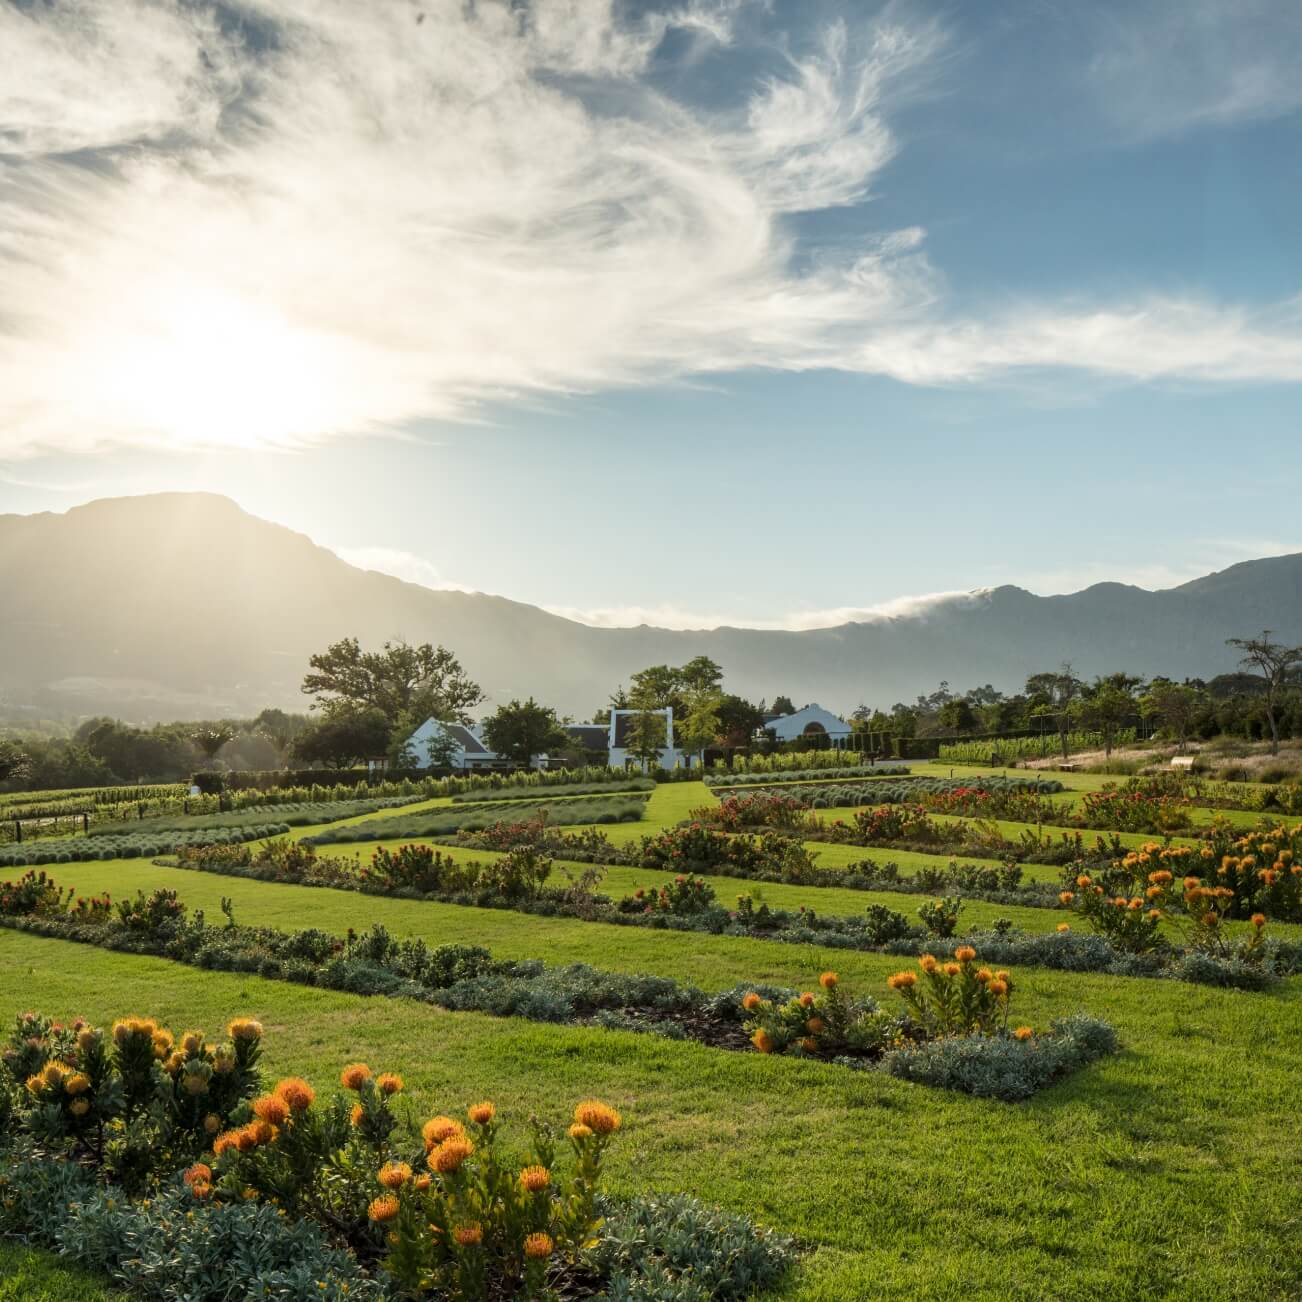 The manicured Leeu Estates gardens are offset by the rugged mountains that surround the property